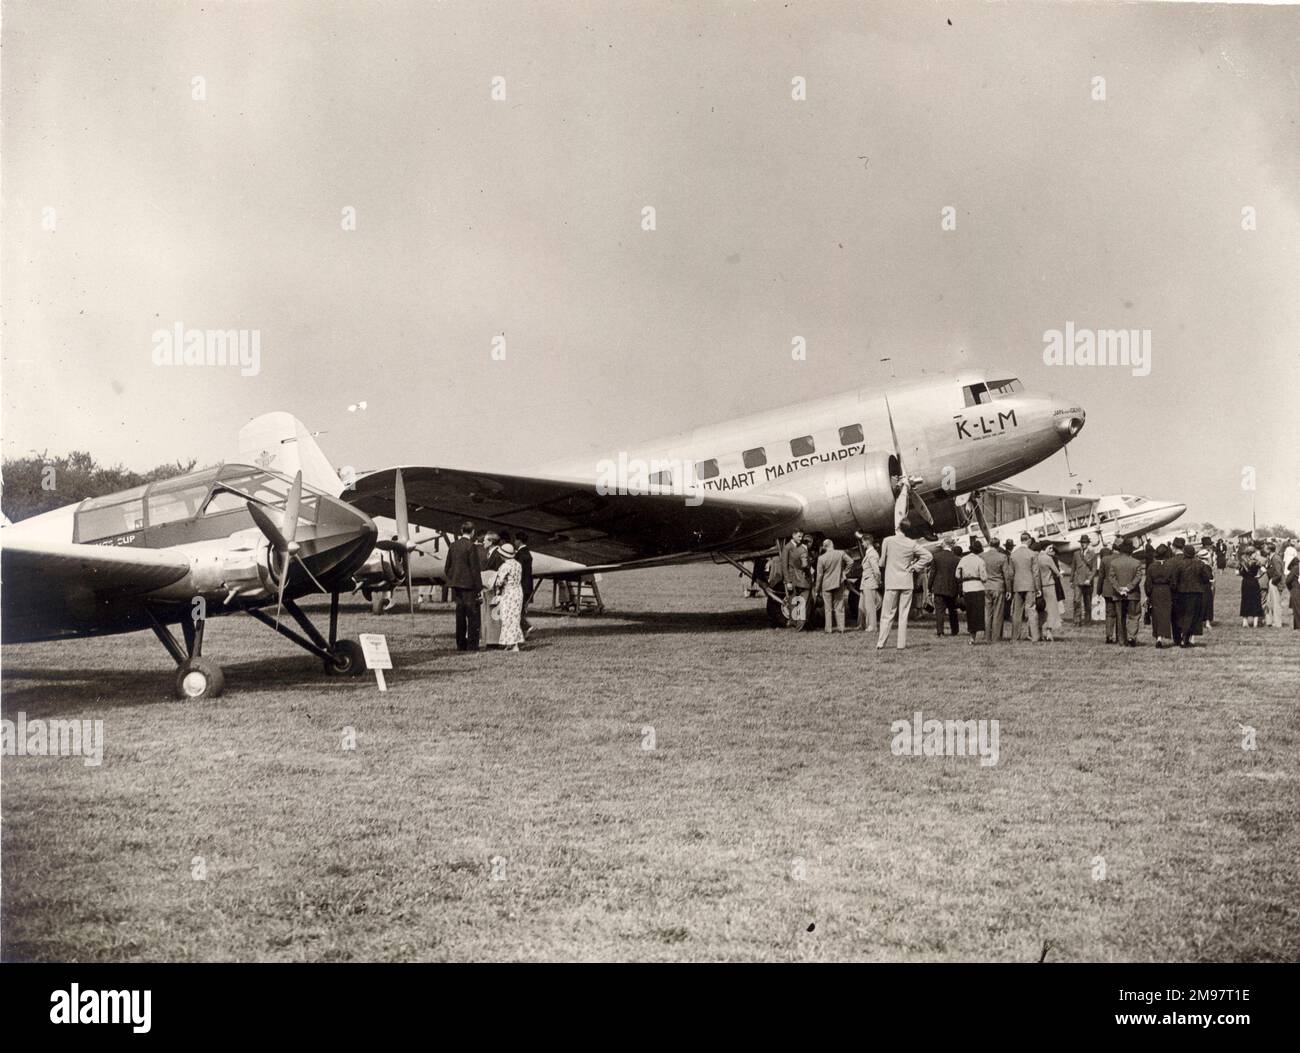 From left: a General Aircraft Monospar, Douglas DC-2-115E, PH-AKJ, Jan van Dent, of KLM and a de Havilland DH86 at the 1936 Royal Aeronautical Society Garden Party at the Fairey Aviation Aerodrome, Great West Road, Hayes, Middlesex. Stock Photo